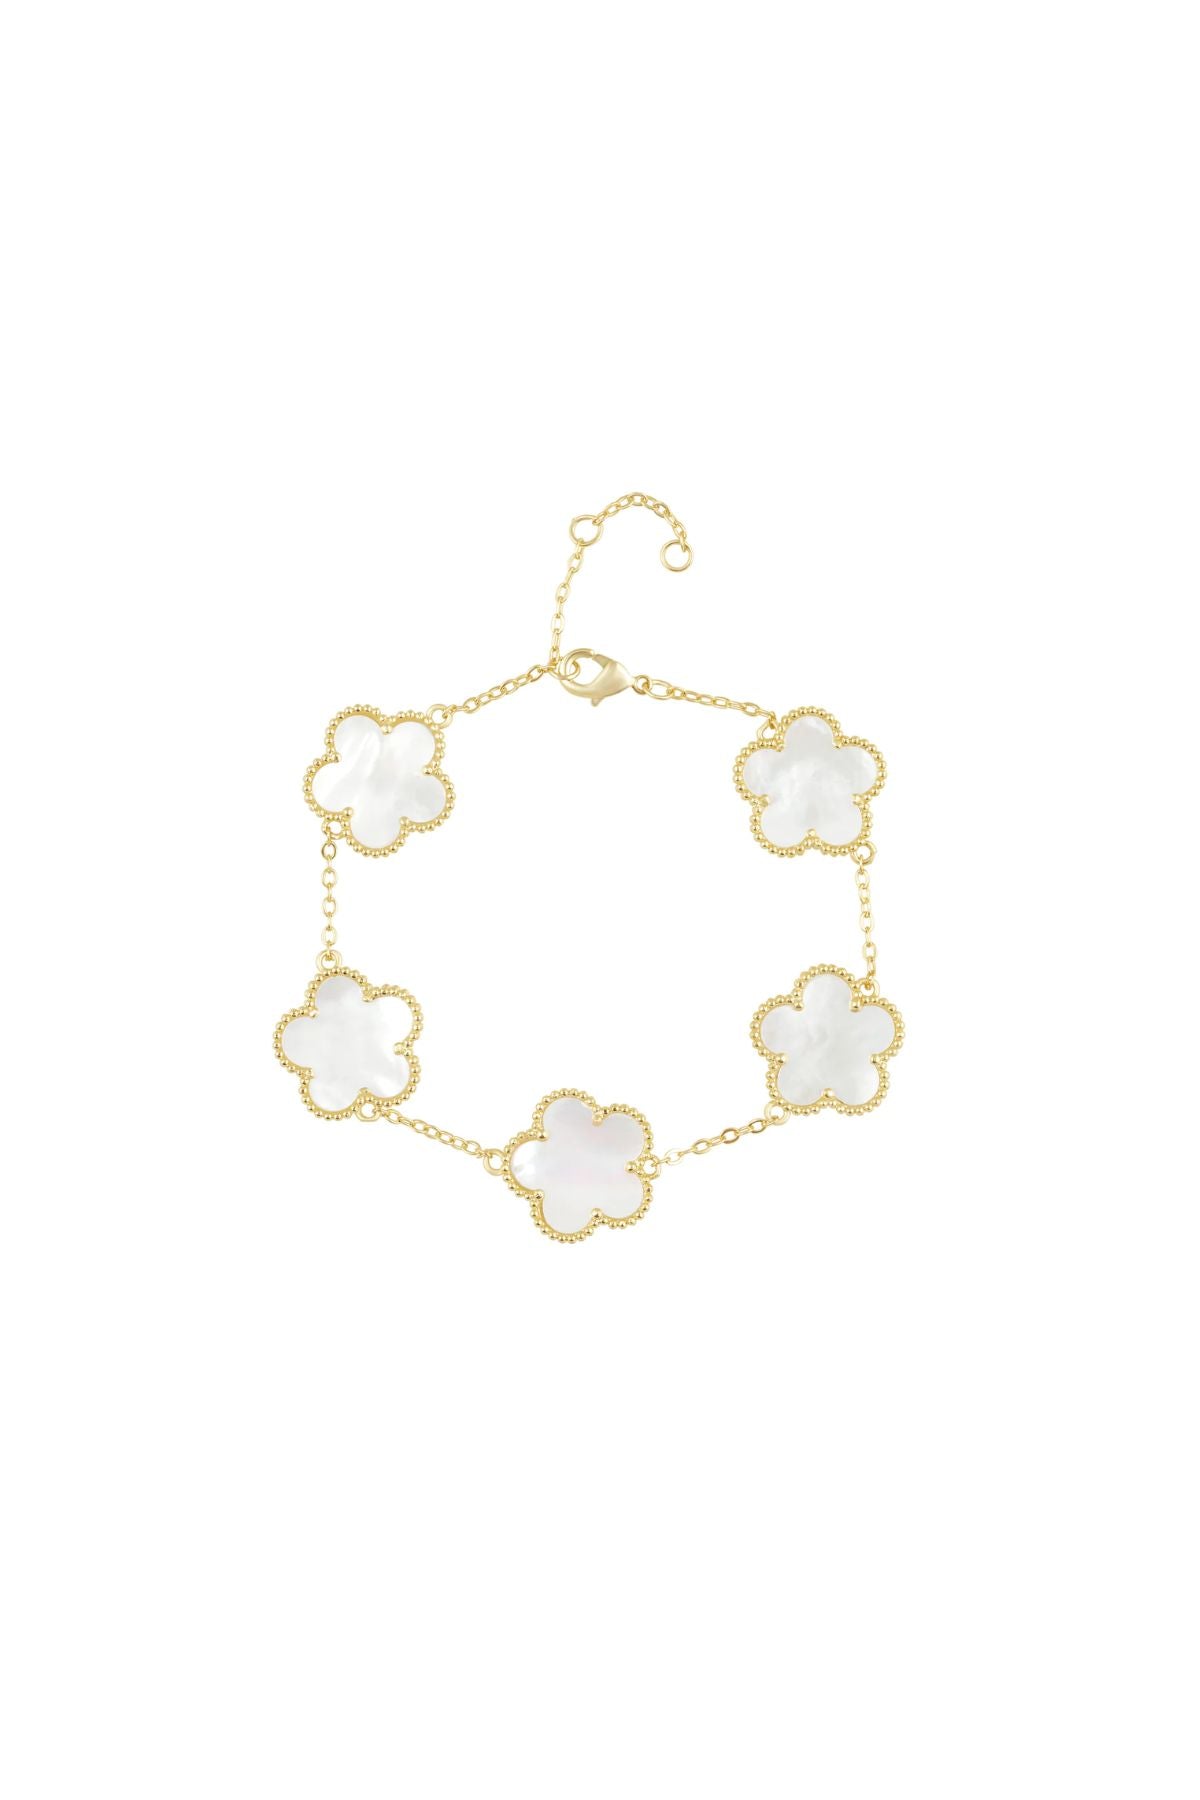 Clover bracelet in white and gold